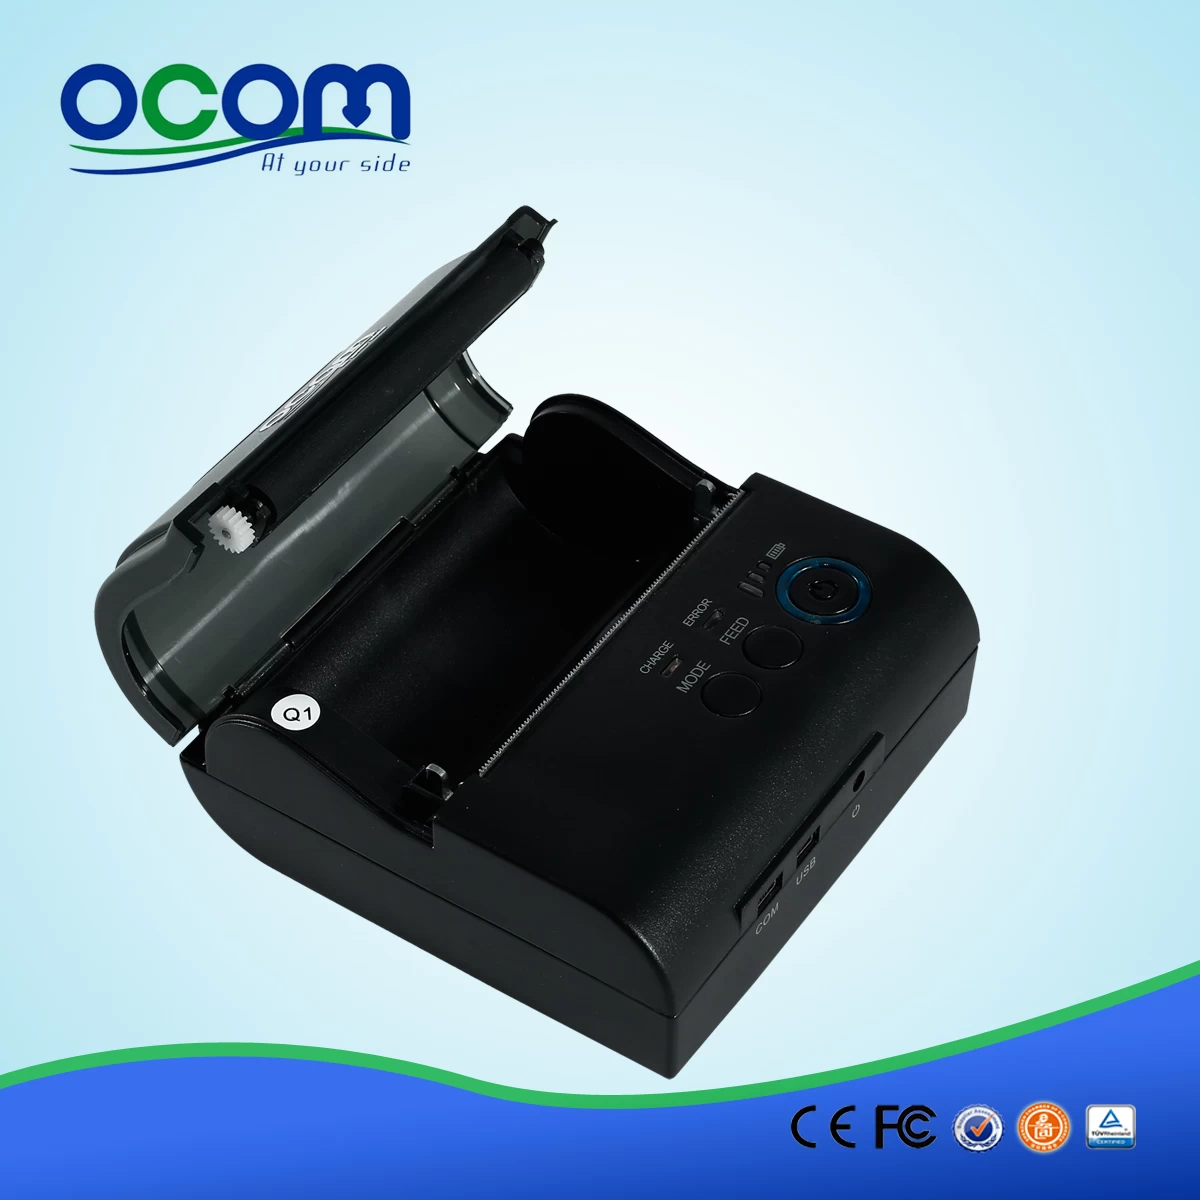 80mm Mini Android or IOS Portable Bluetooth Receipt Printer with SDK Supplied